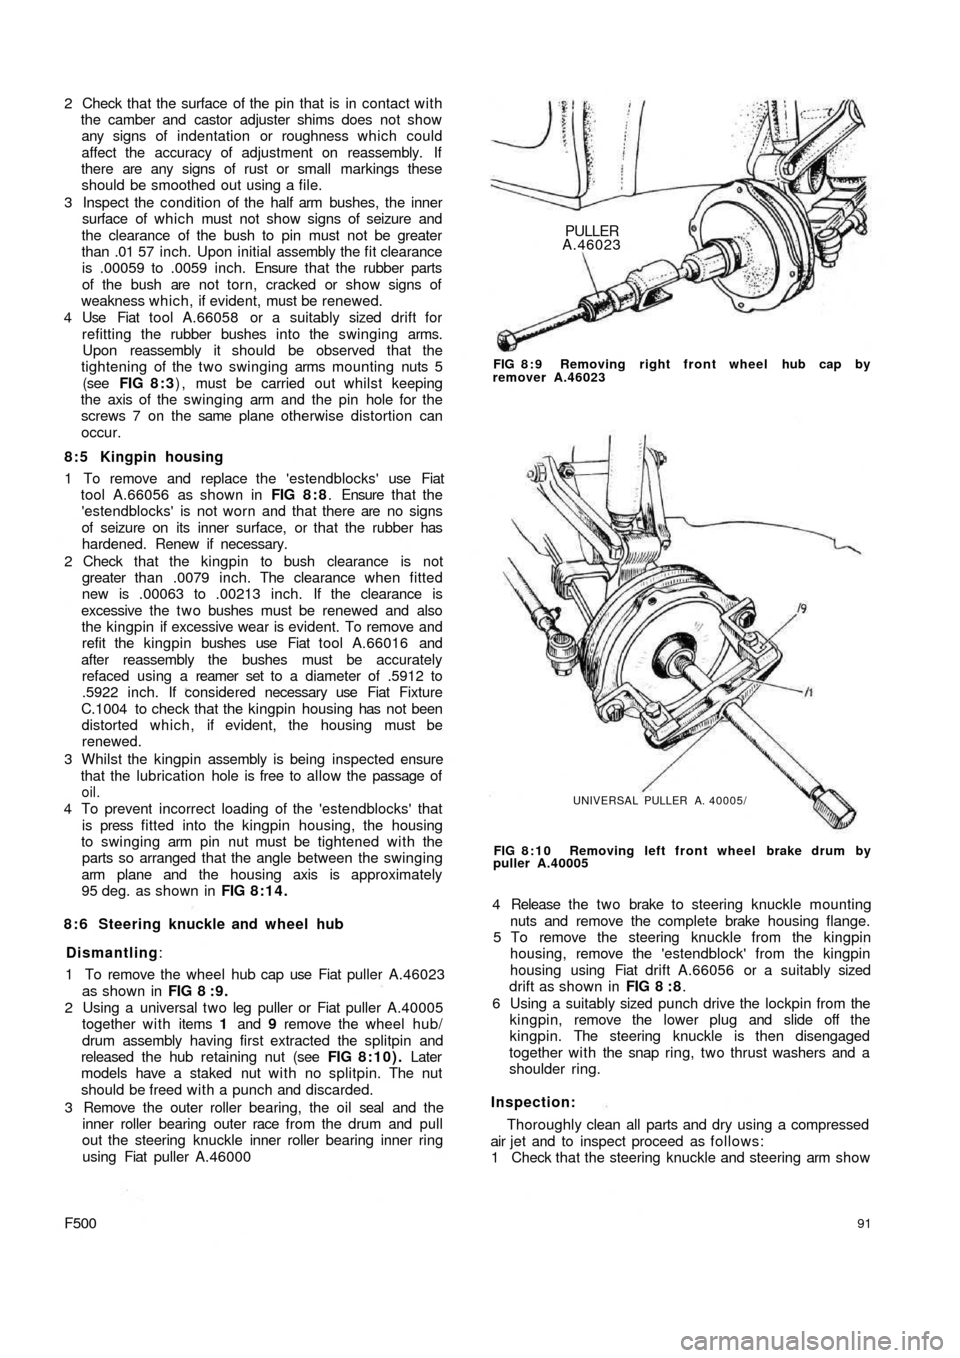 FIAT 500 1958 1.G Workshop Manual 2  Check that the surface of the pin that is in contact with
the camber and castor adjuster shims does not show
any signs of indentation or roughness which could
affect the  accuracy of adjustment on 